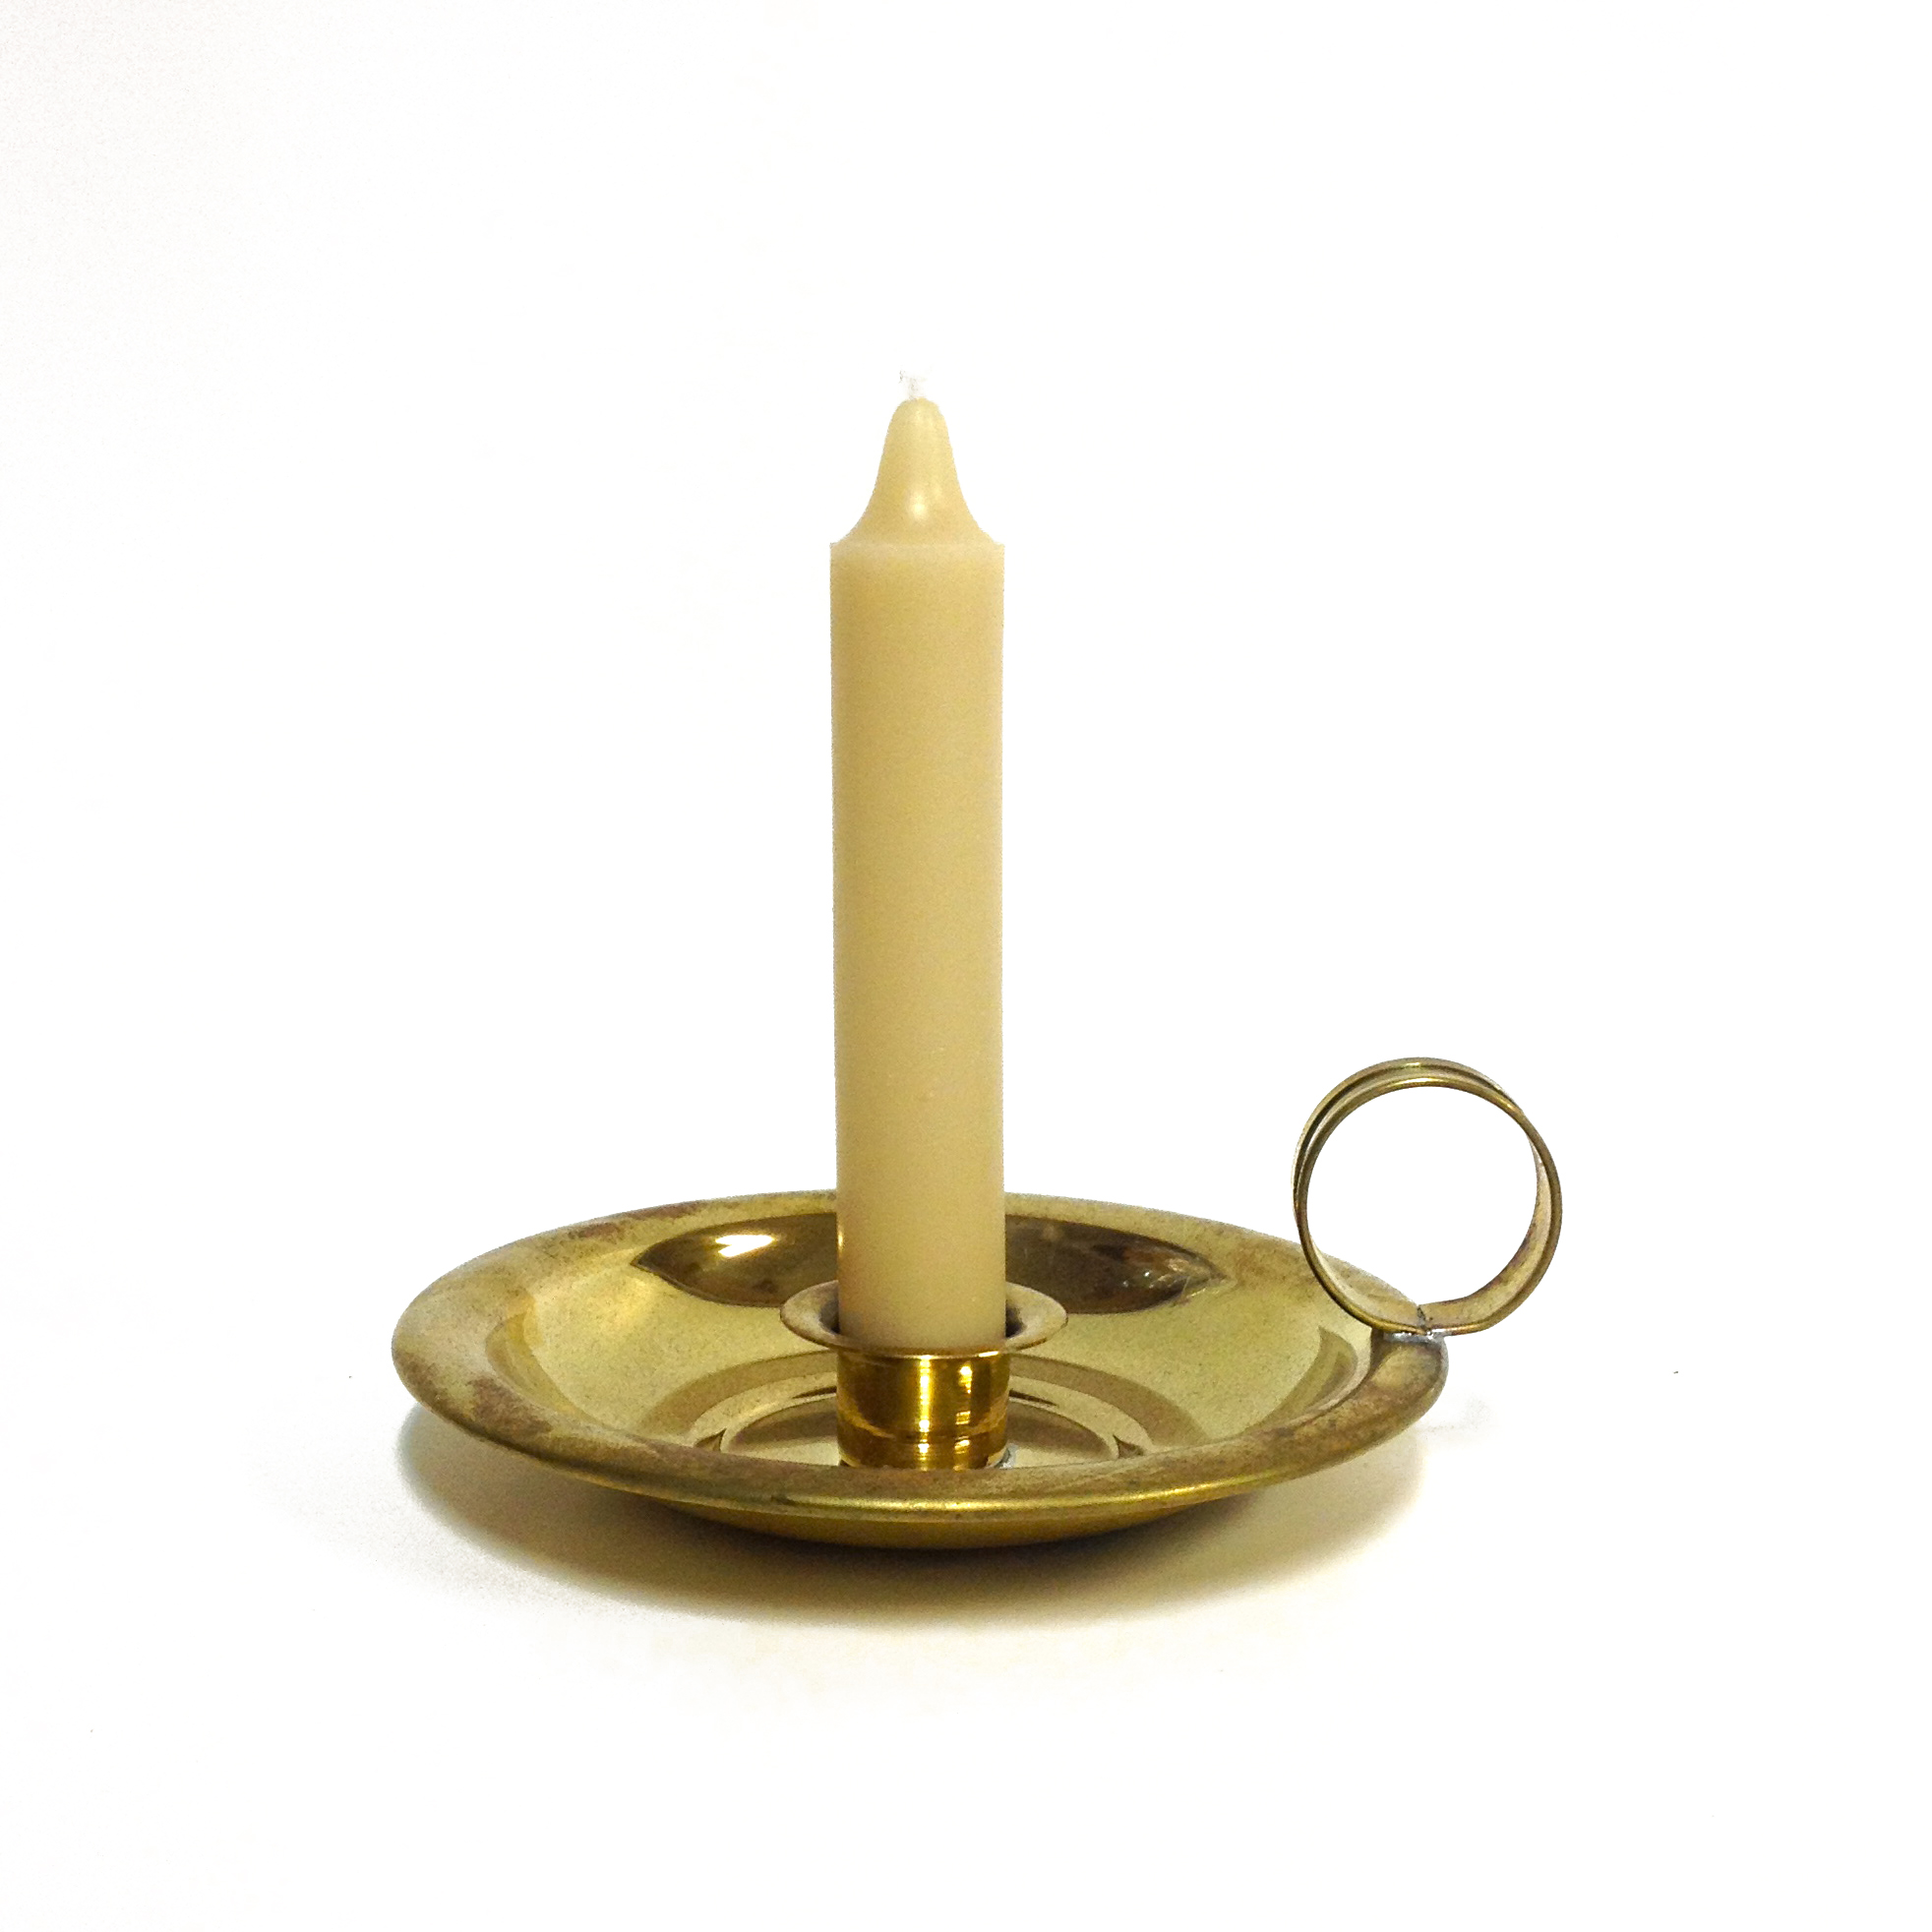 Candle Holders Accessories Queen B Beeswax Candles Page 5 with Amazing and Gorgeous Old Fashioned Candle Holder for Your choice